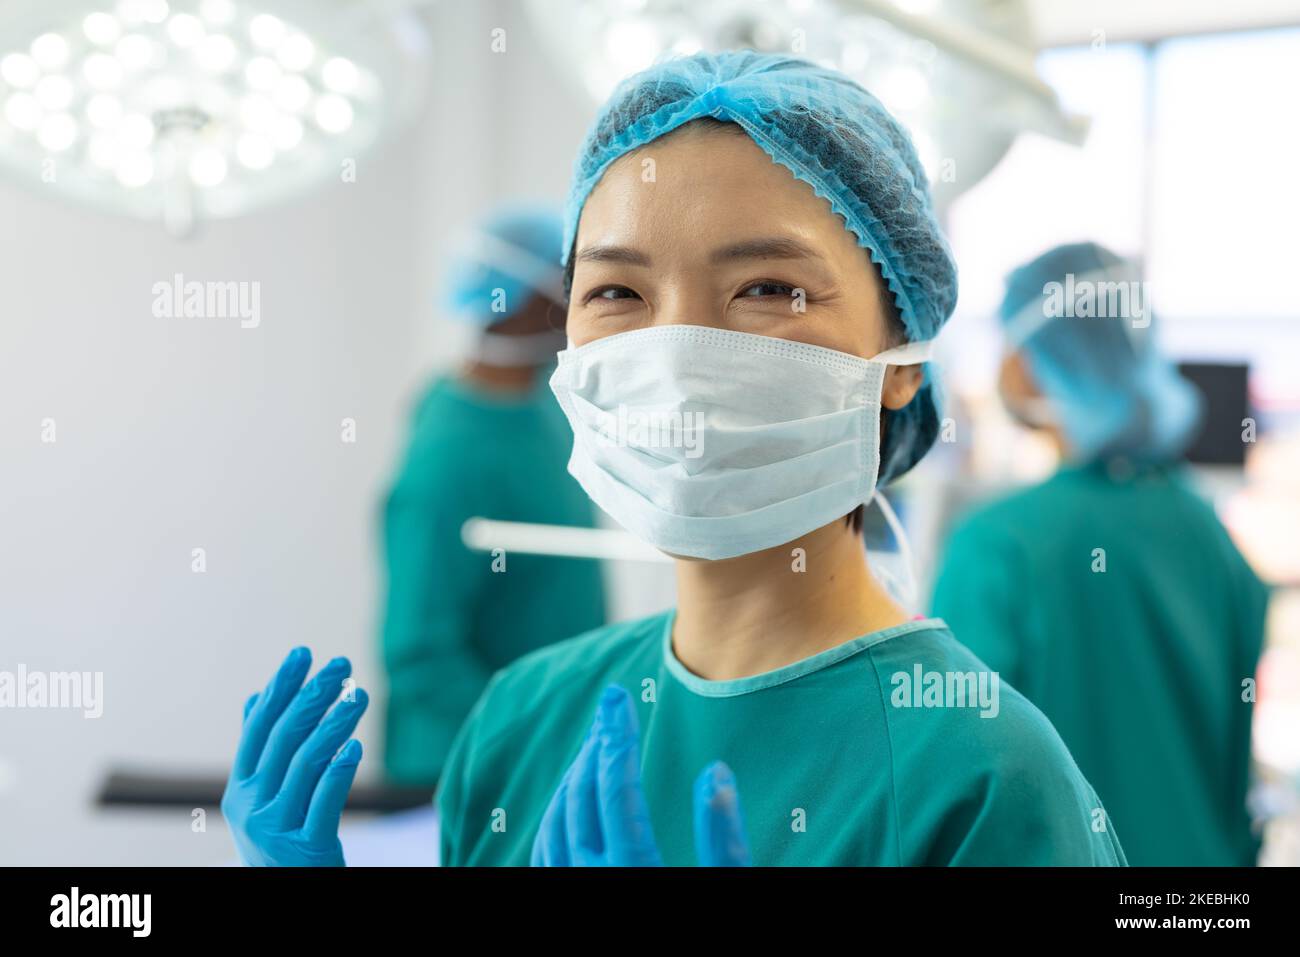 Smiling asian female surgeon in gown, mask, gloves and cap in operating theatre, copy space. Hospital, medical and healthcare services. Stock Photo